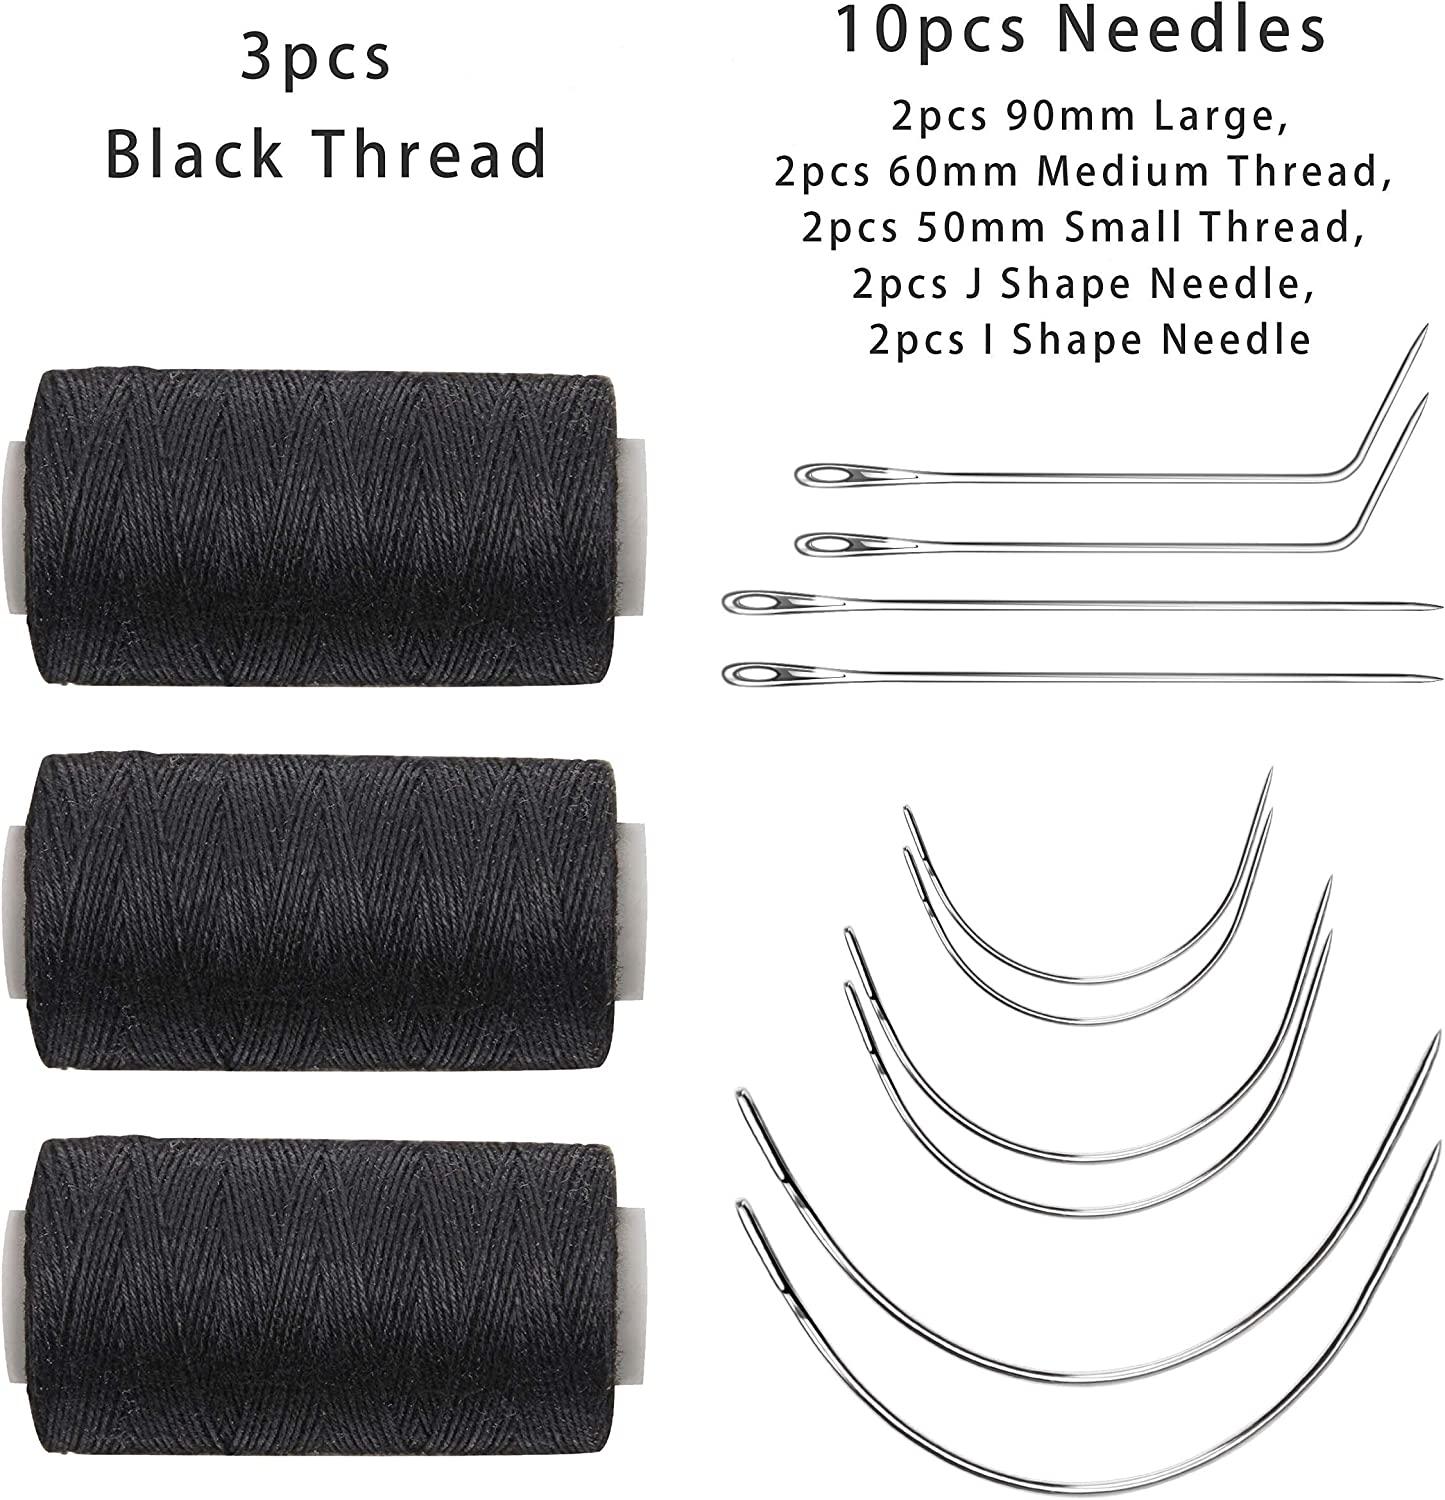 Ryalan Weaving Needle Combo Deal Black Thread with 10pcs Needle for Making  Wig Sewing Hair Weft Hair Weave Extension, Big Medium and Small C J Shape  Curved Needle I Needle (3 Thread